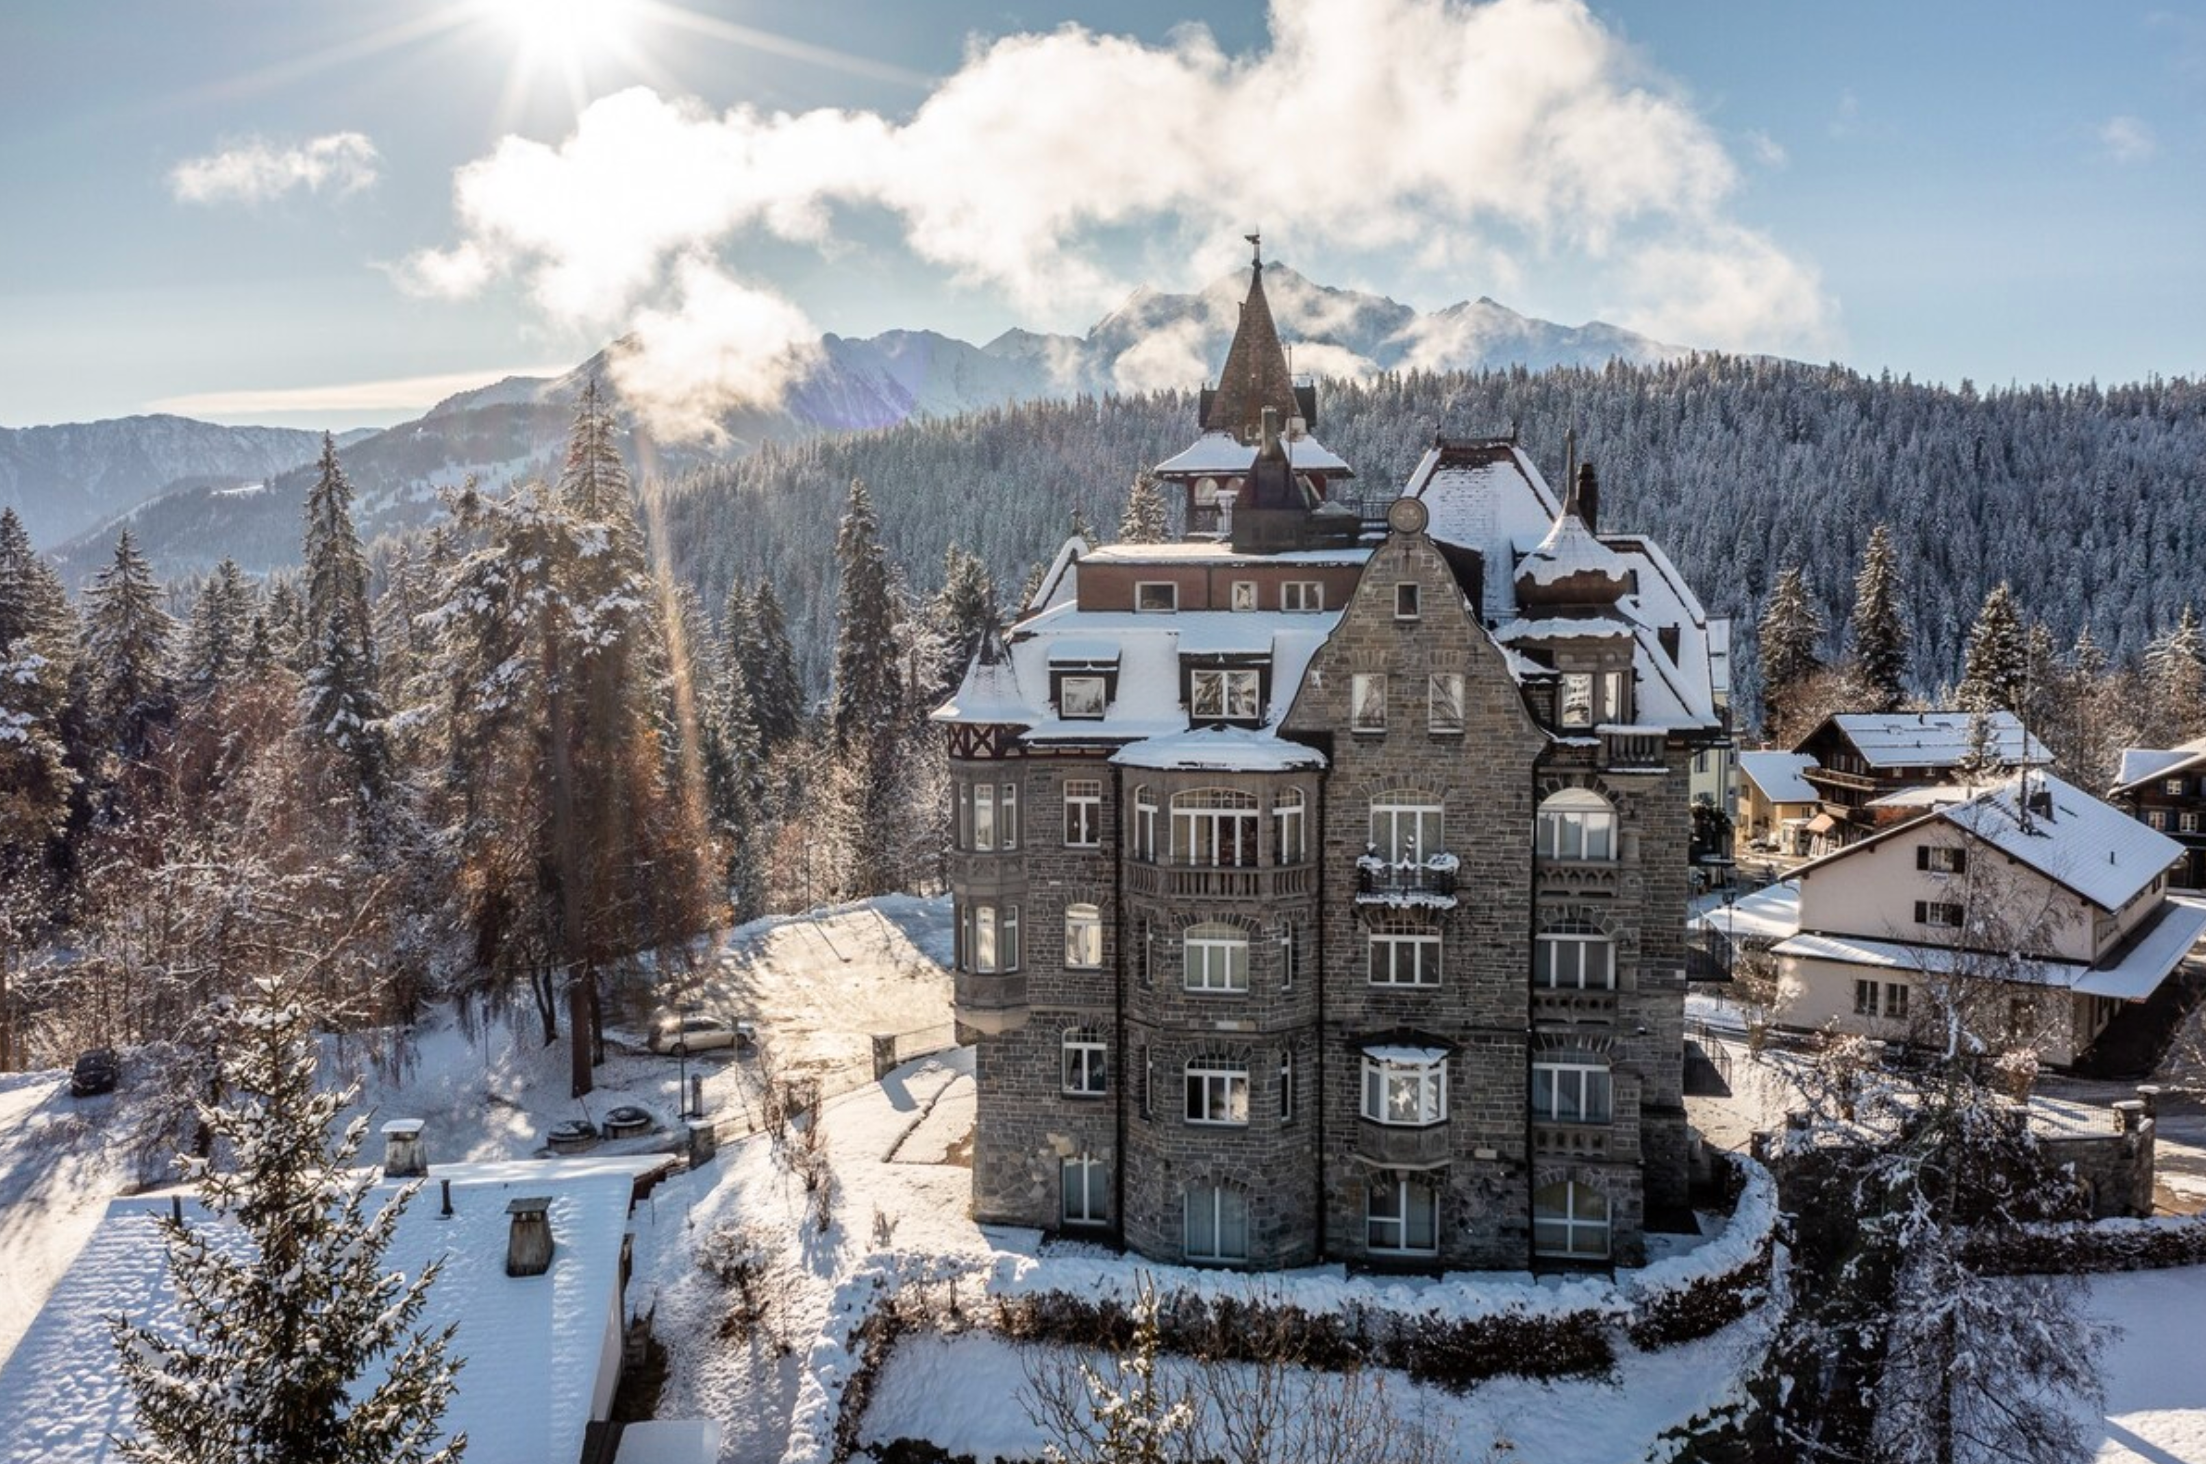 Up at the very top of a whimsical tower that looks like an animation from a Disney movie, this luxury castle apartment has unmatched views of the snowy, forested town of Flims, Switzerland, is accessible via elevator, and has a rooftop terrace. The apartment is spacious enough to accommodate a family or a small group of friends, with three stories and three bedrooms. For an especially euphoric stay, book during the Flims Hot Air Balloon Festival which typically takes place the last week of February. $845, Airbnb (starting price). <a href="https://www.airbnb.com/rooms/786594155921786215">Get it now!</a><p>Sign up to receive the latest news, expert tips, and inspiration on all things travel</p><a href="https://www.cntraveler.com/newsletter/the-daily?sourceCode=msnsend">Inspire Me</a>